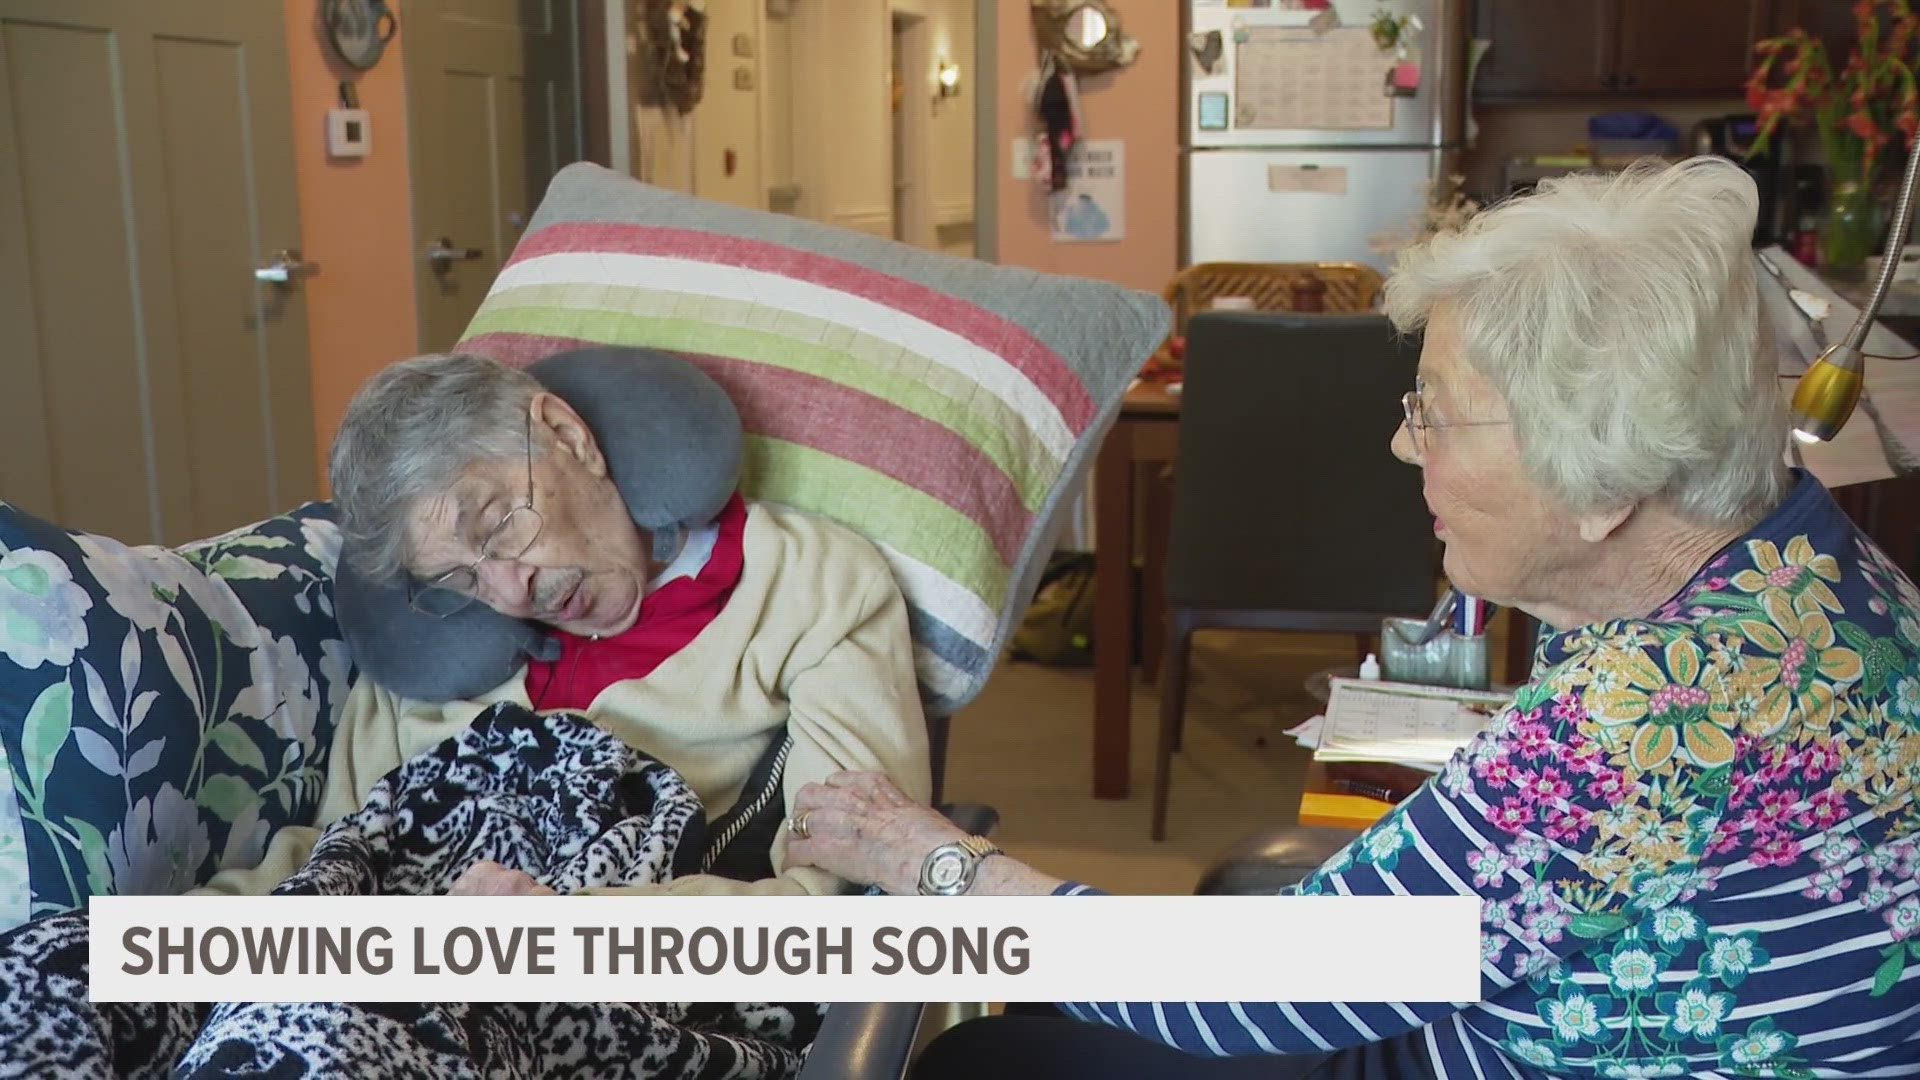 Gerry and Cyrus live in separate care levels in senior living, but come together Friday mornings to share their love through music therapy.